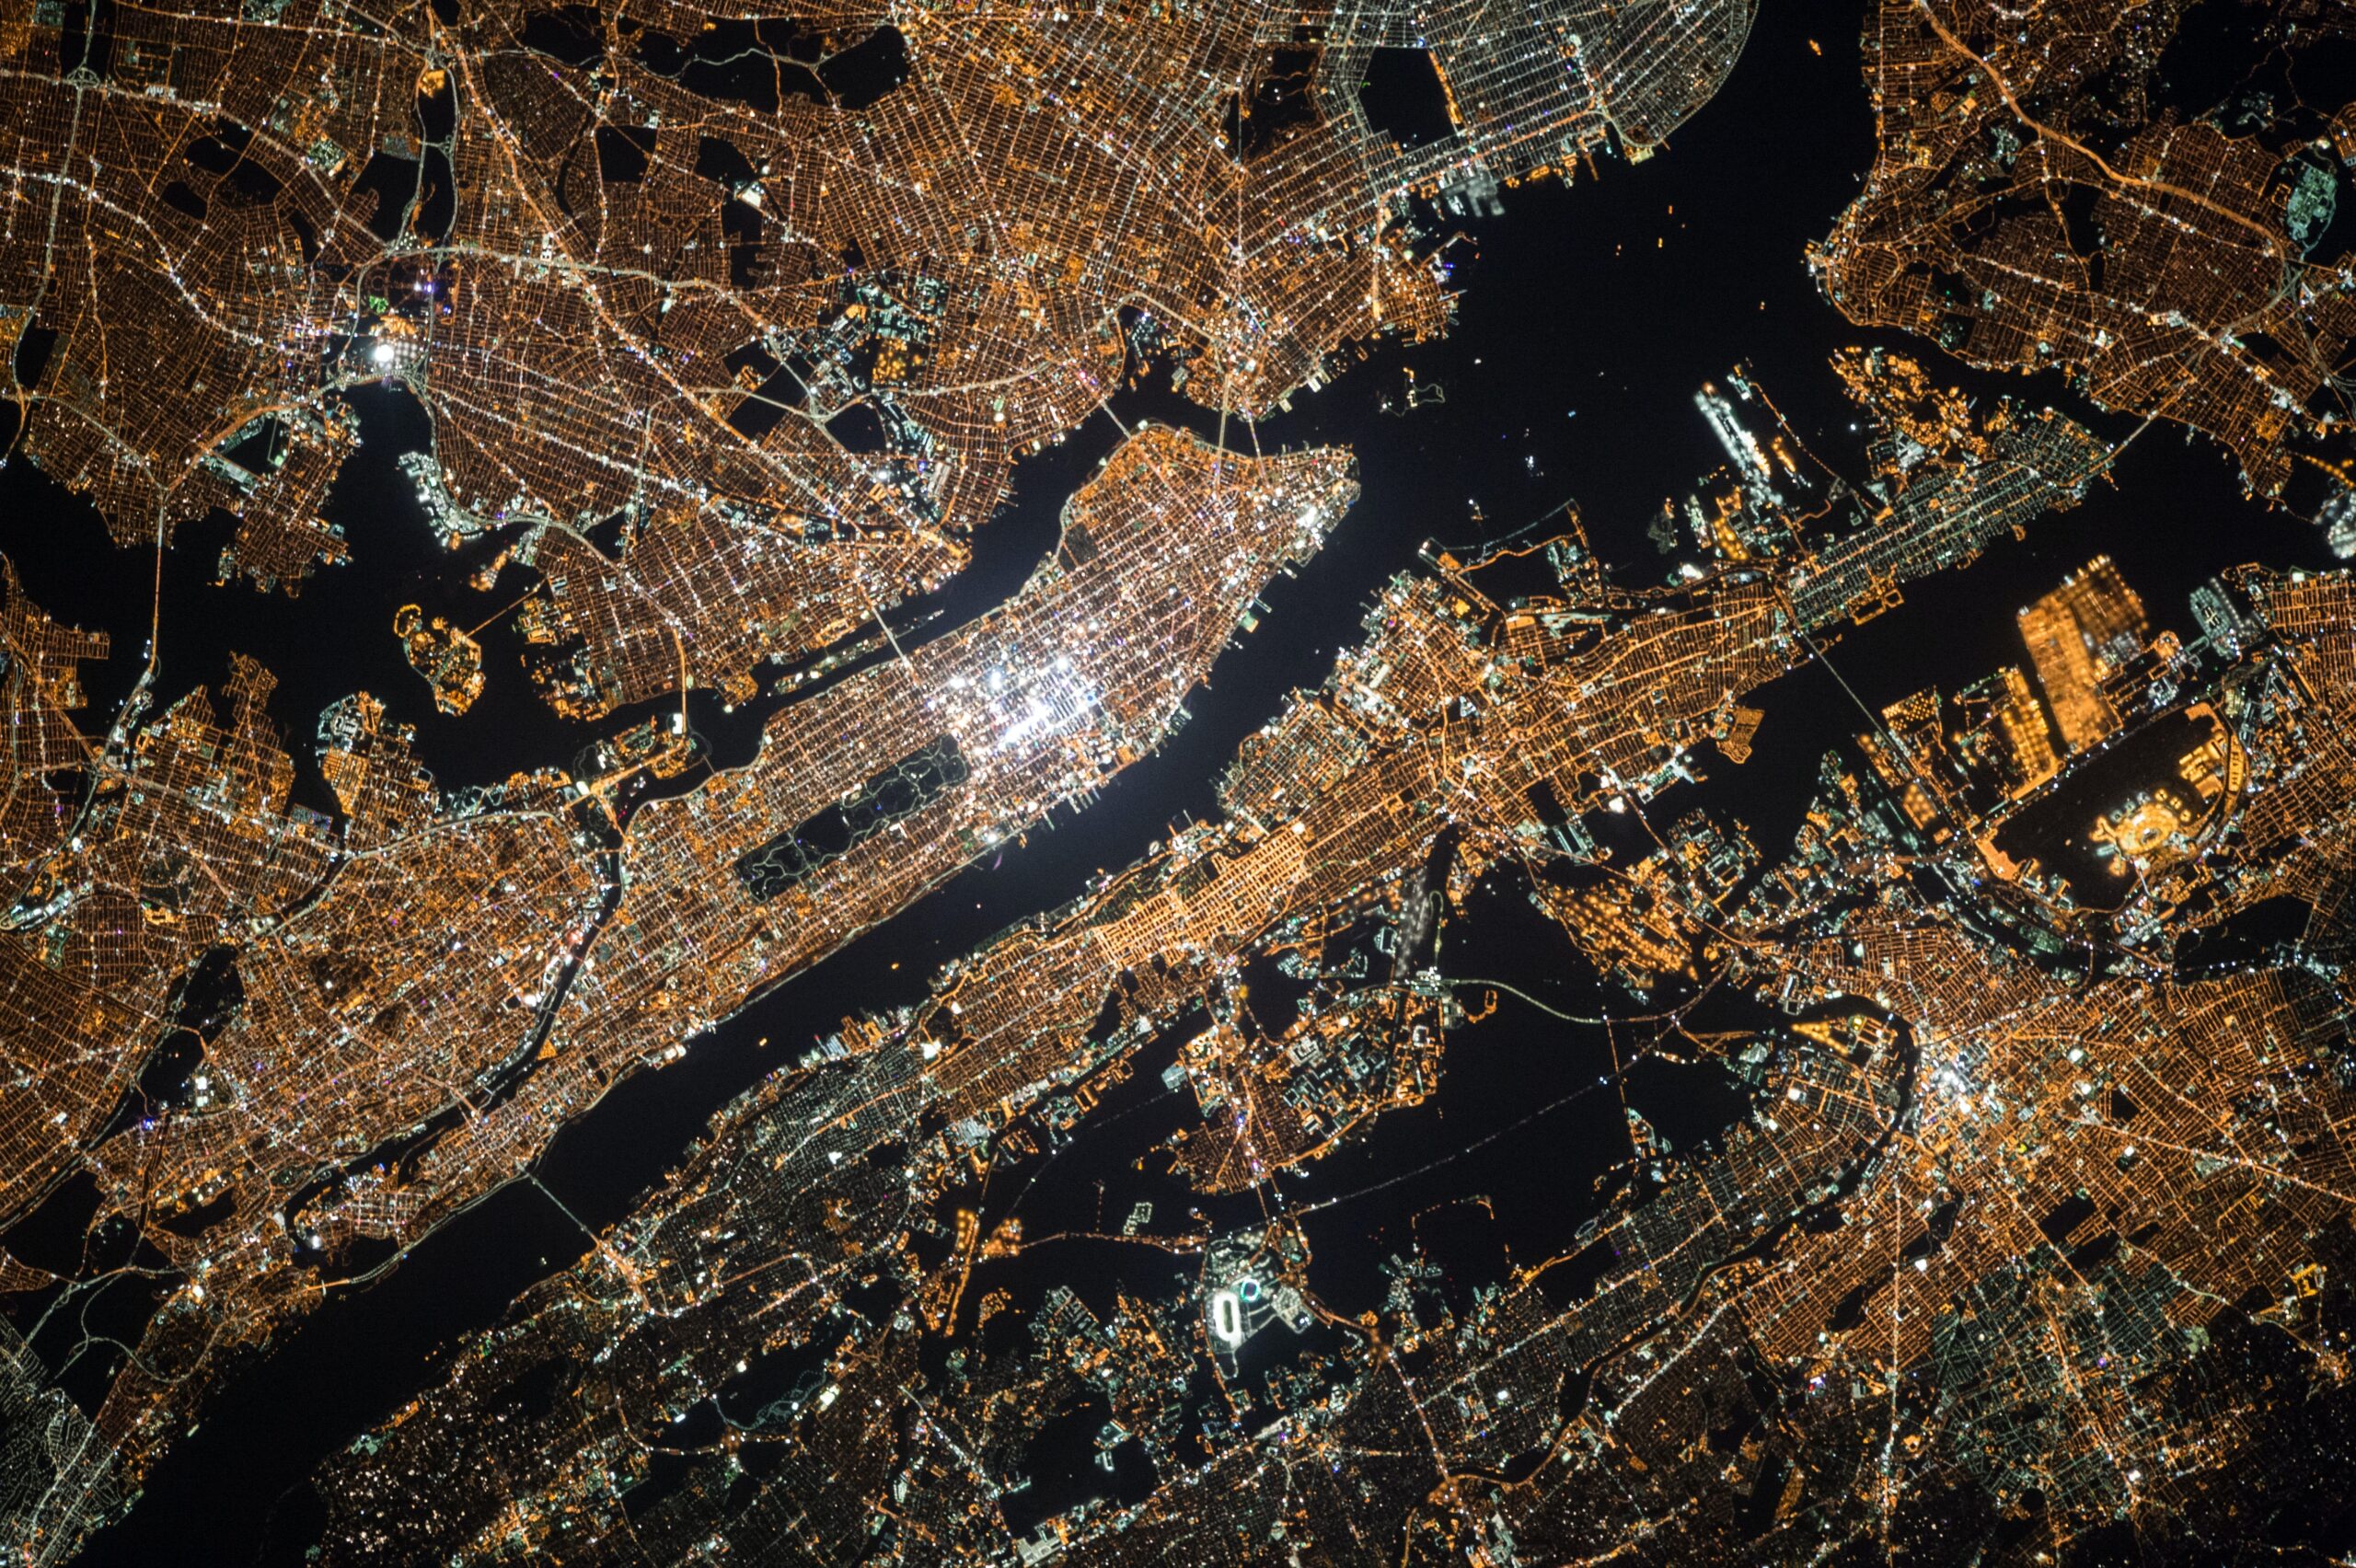 a birds-eye view, night time image of a global trendy city